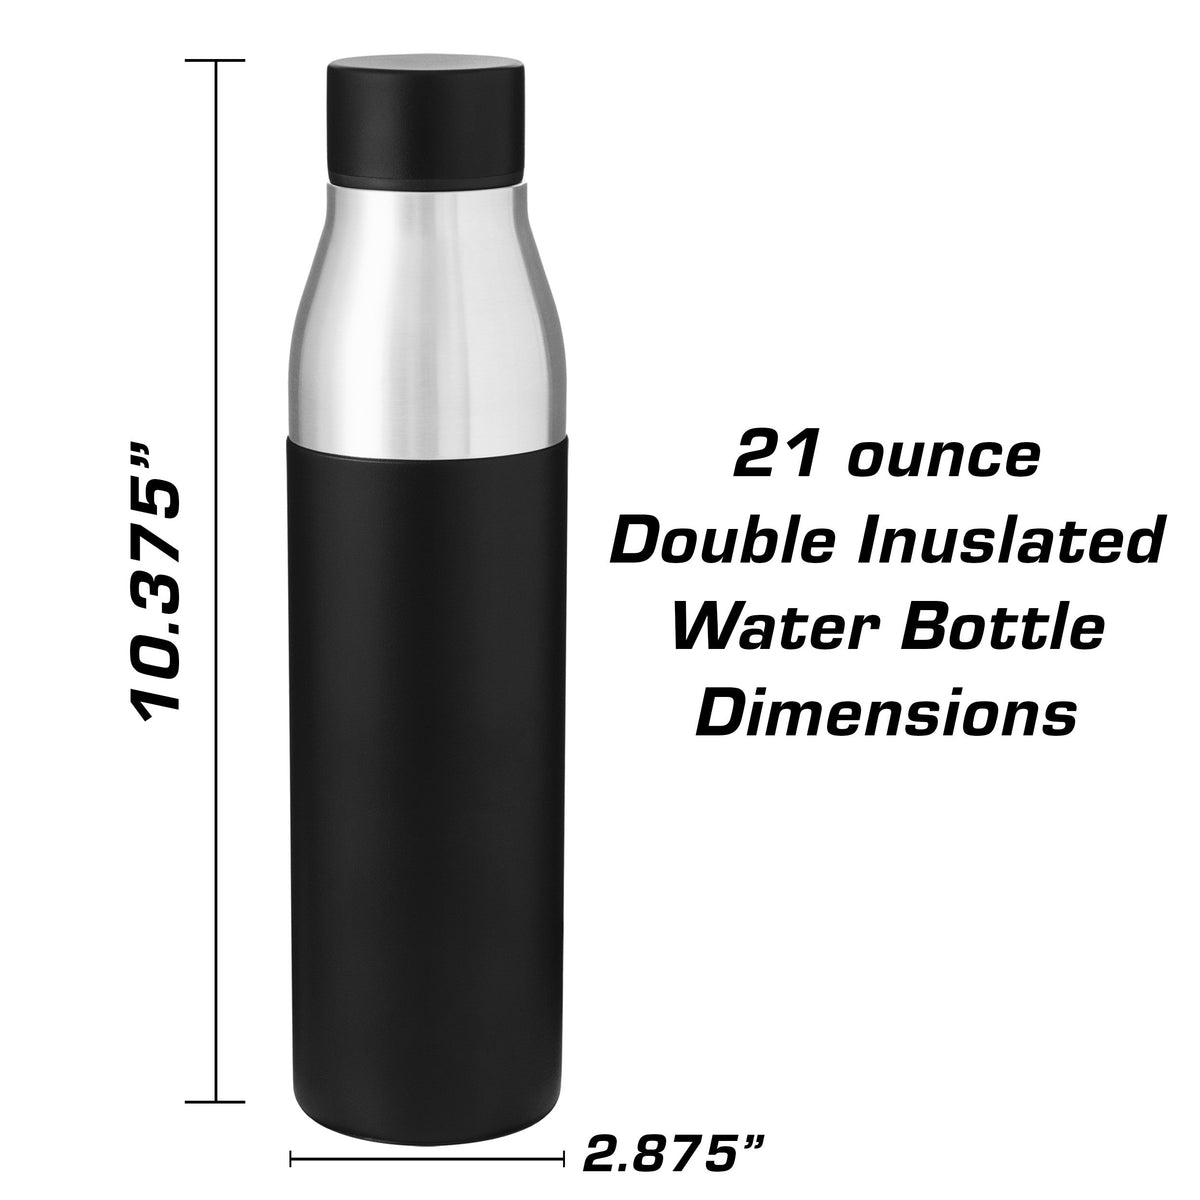 Porsche Taycan Turbo S Insulated Stainless Steel Water Bottle - 21 oz